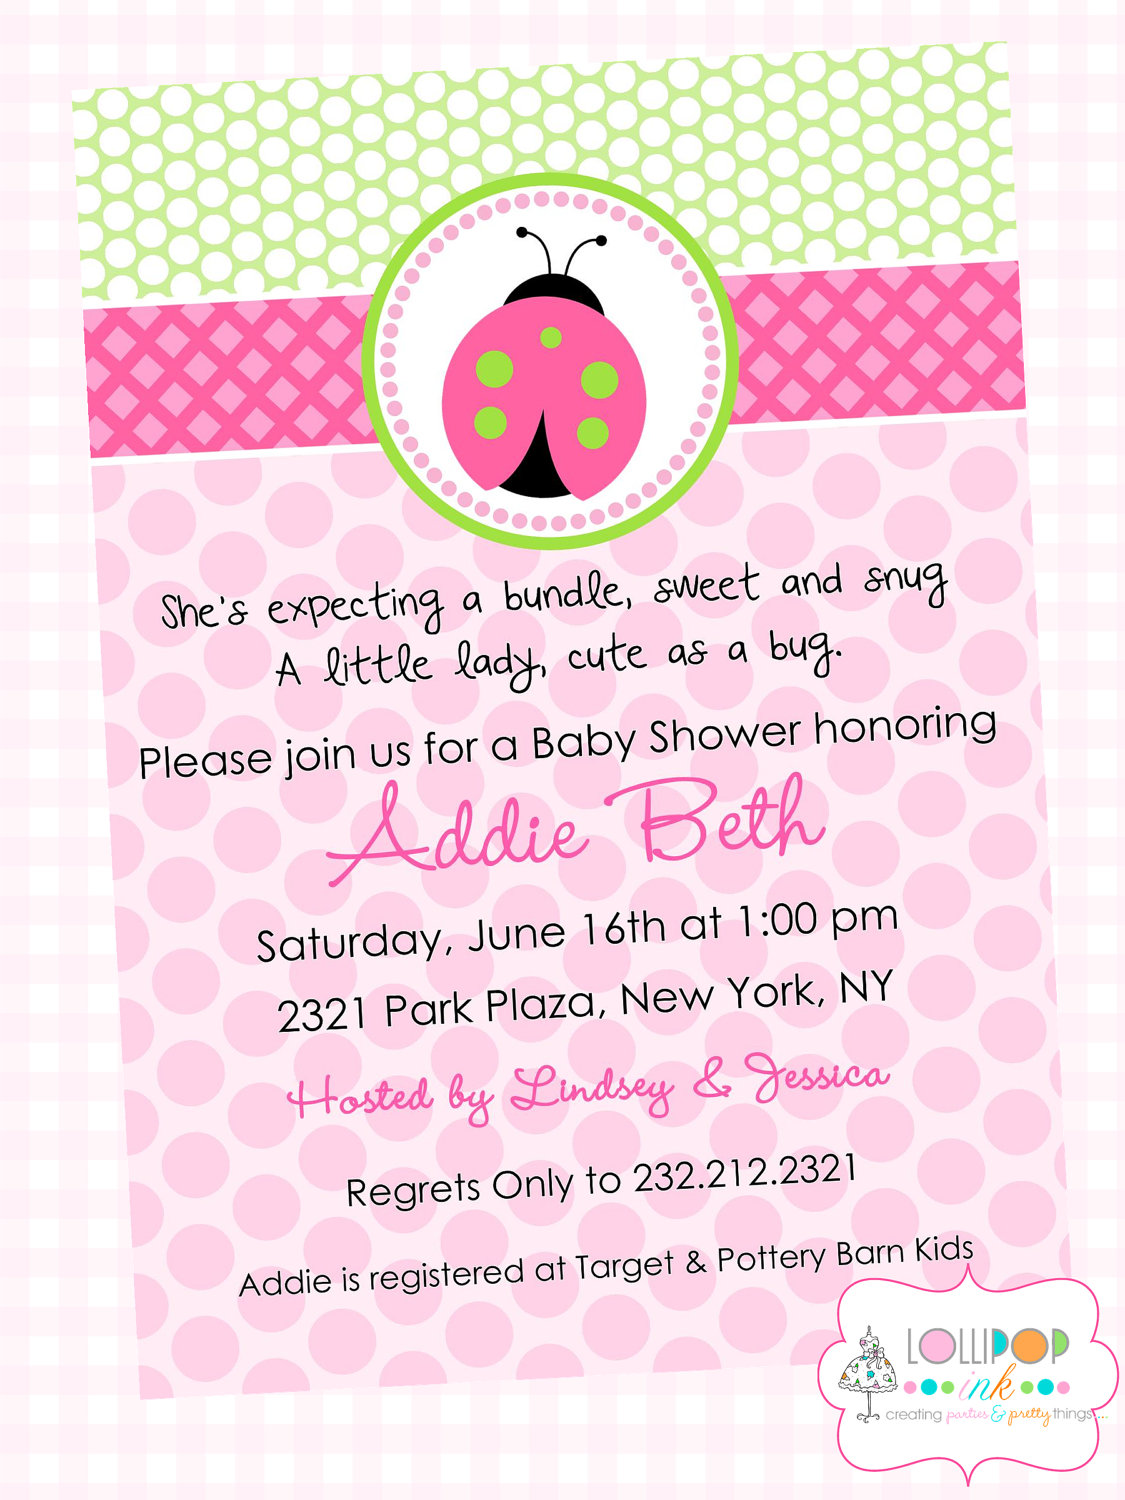 Full Size of Baby Shower:delightful Baby Shower Invitation Wording Picture Designs Baby Shower Invitation Wording Baby Shower Invitations Wording To Make Adorable Baby Shower Invitation Design Online 41020165